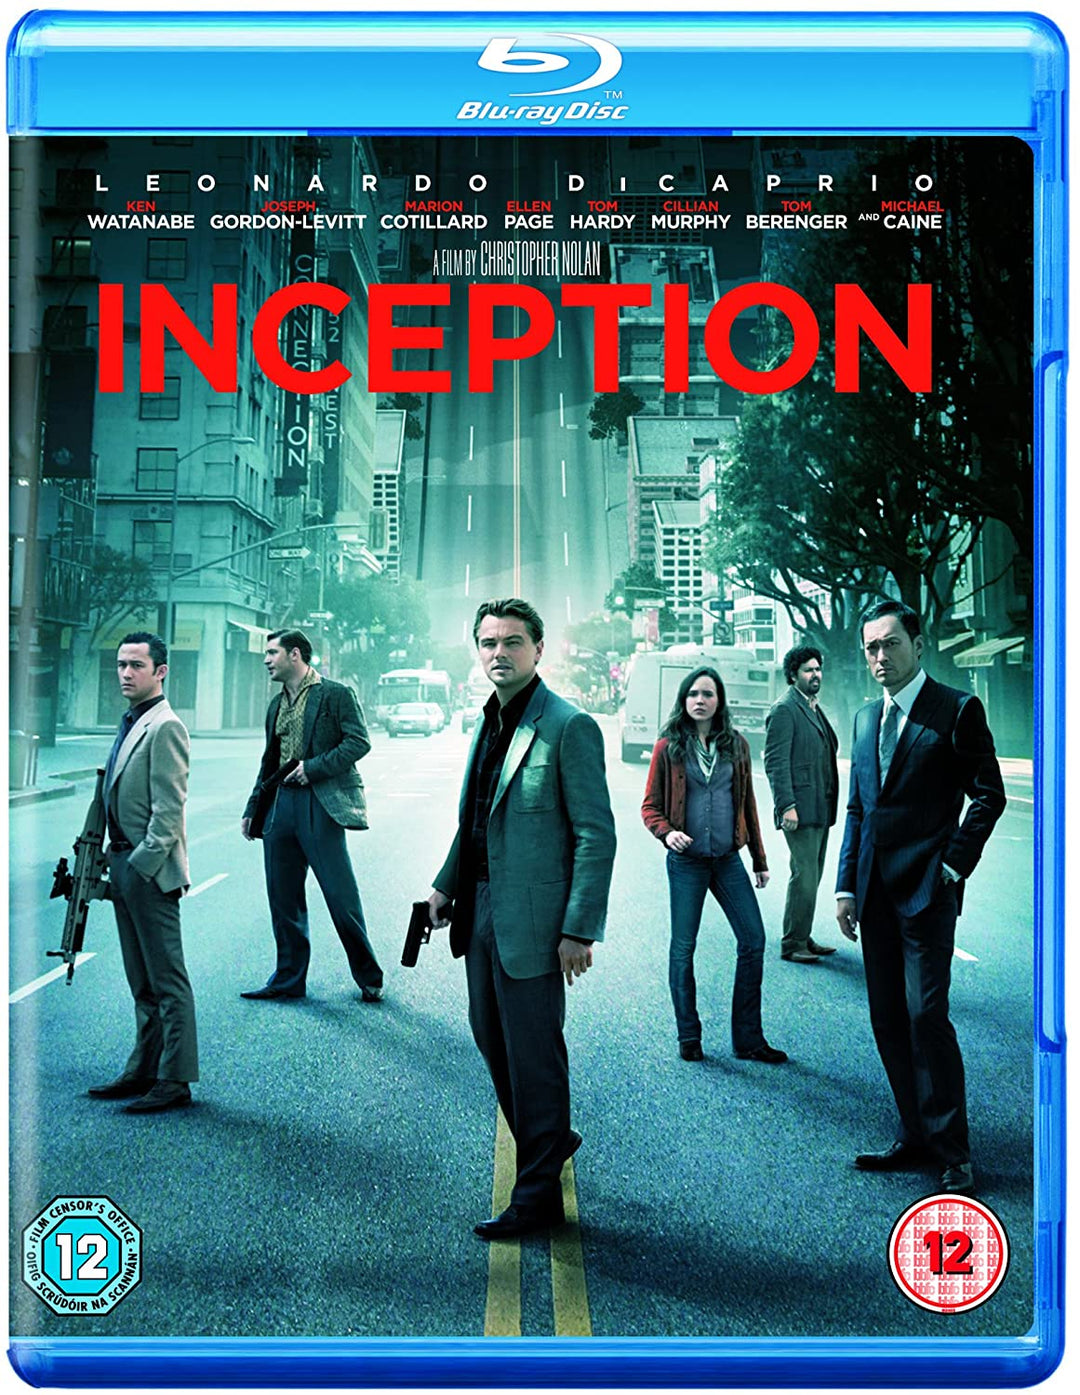 Inception [2010] [Region Free] – Action/Science-Fiction [Blu-Ray]